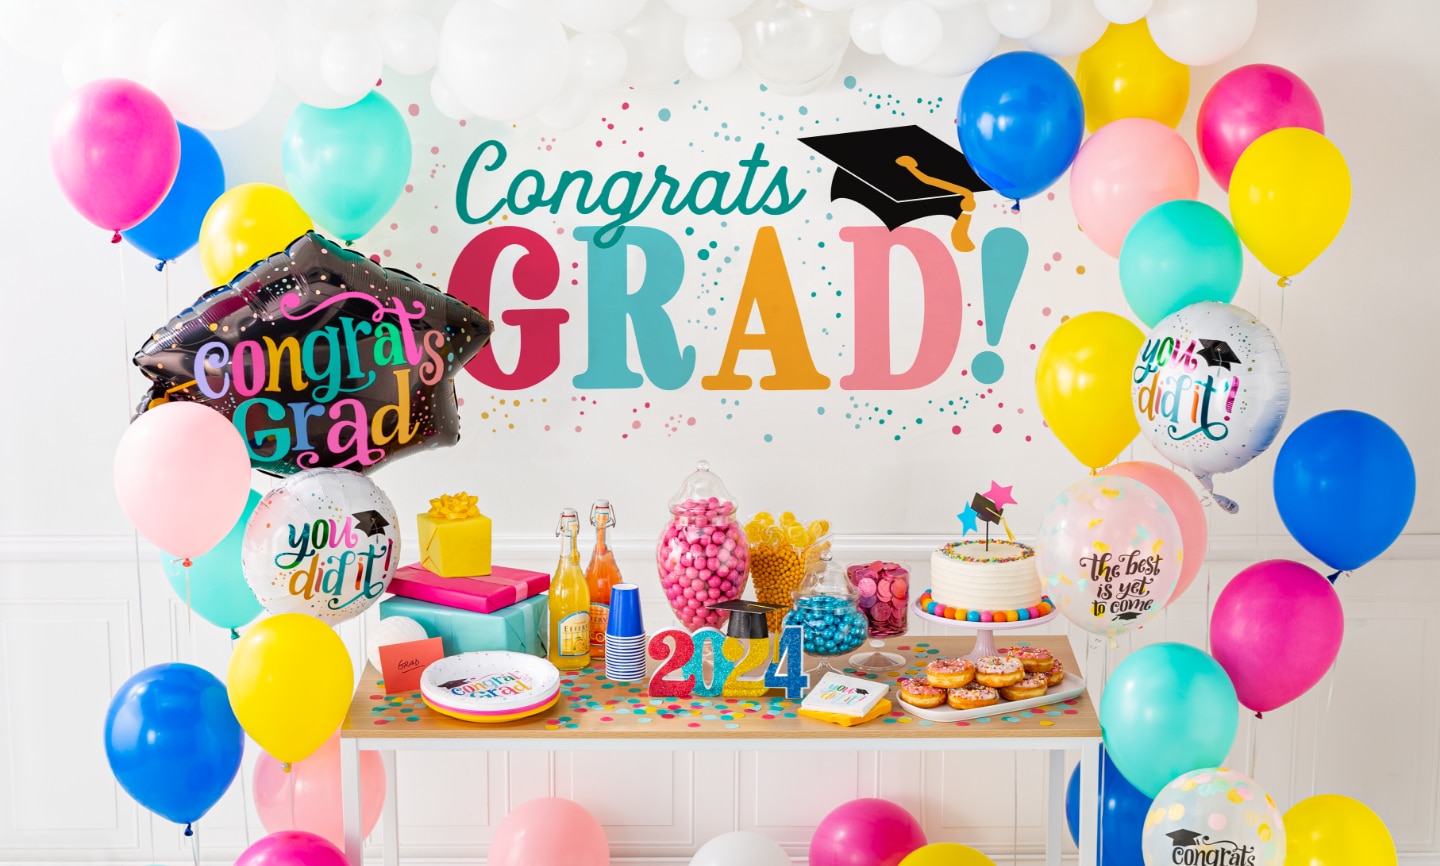 A table set with sweet treats surrounded by celebratory graduation themed wall decorations and balloons.